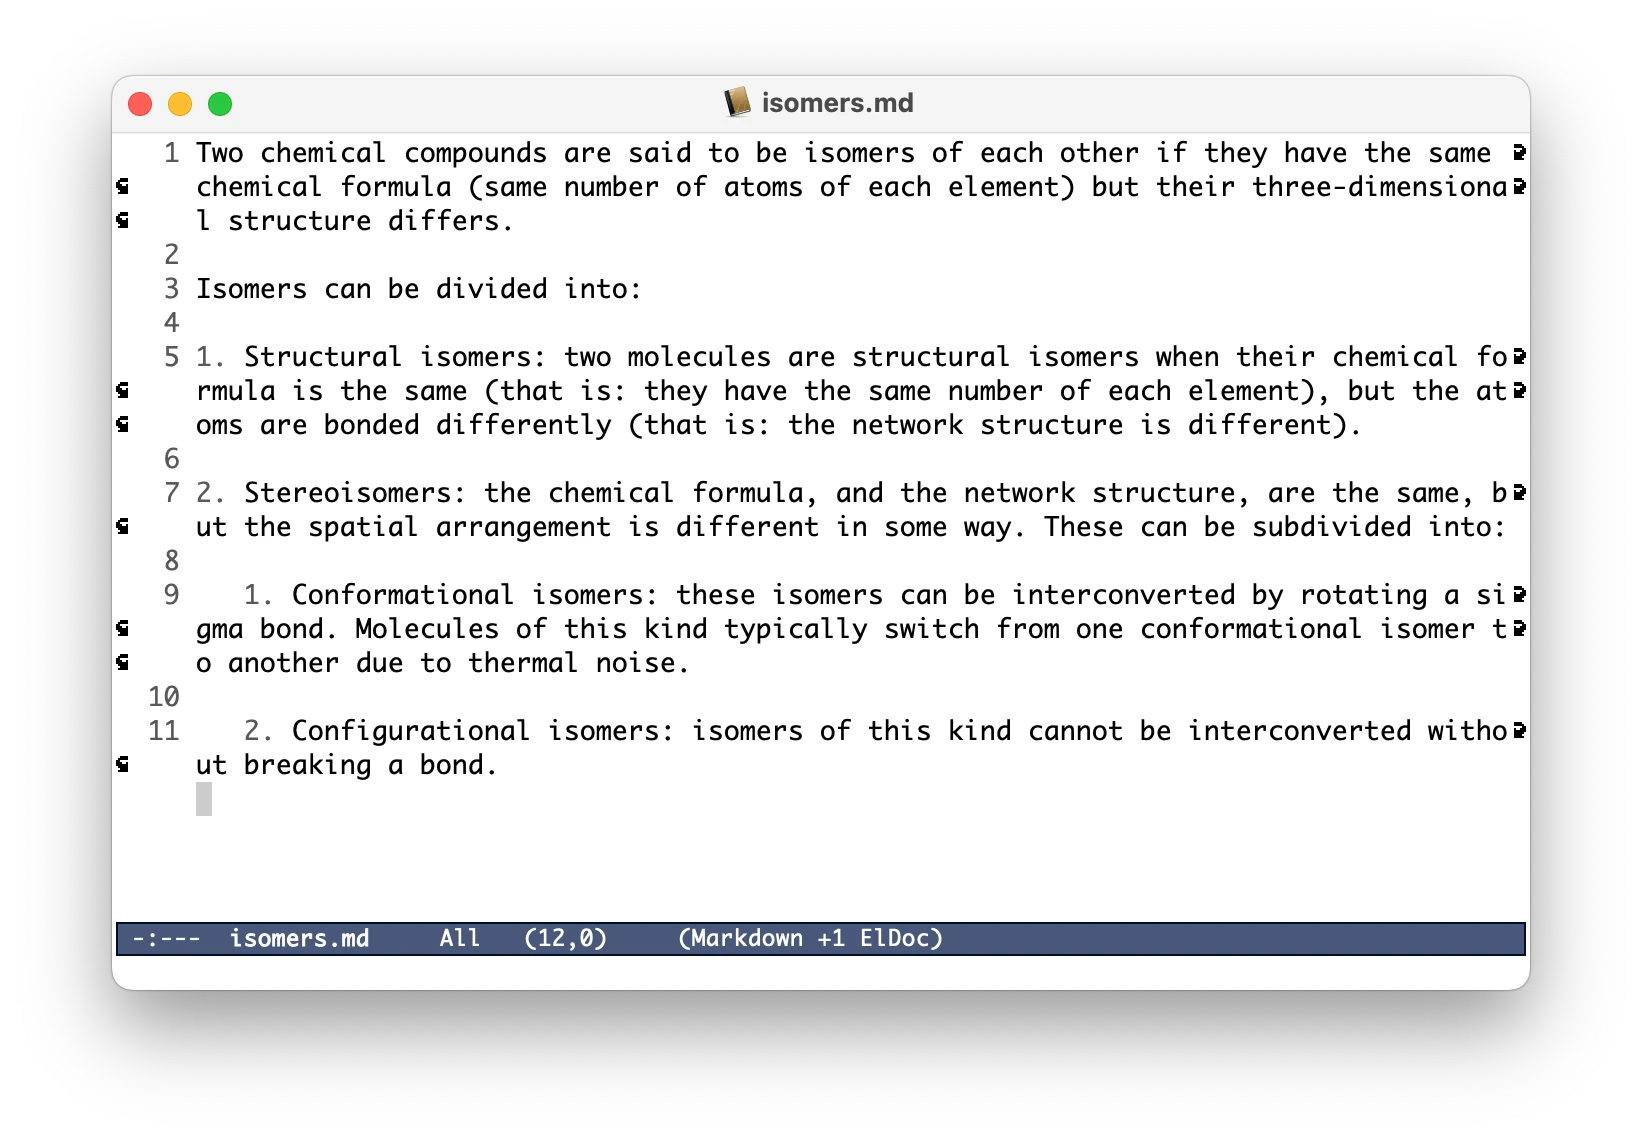 A screenshot of Emacs, showing word wrapping around the 80 column mark. The word wrap does not respect indentation, since lines continue from the leftmost side of the screen.